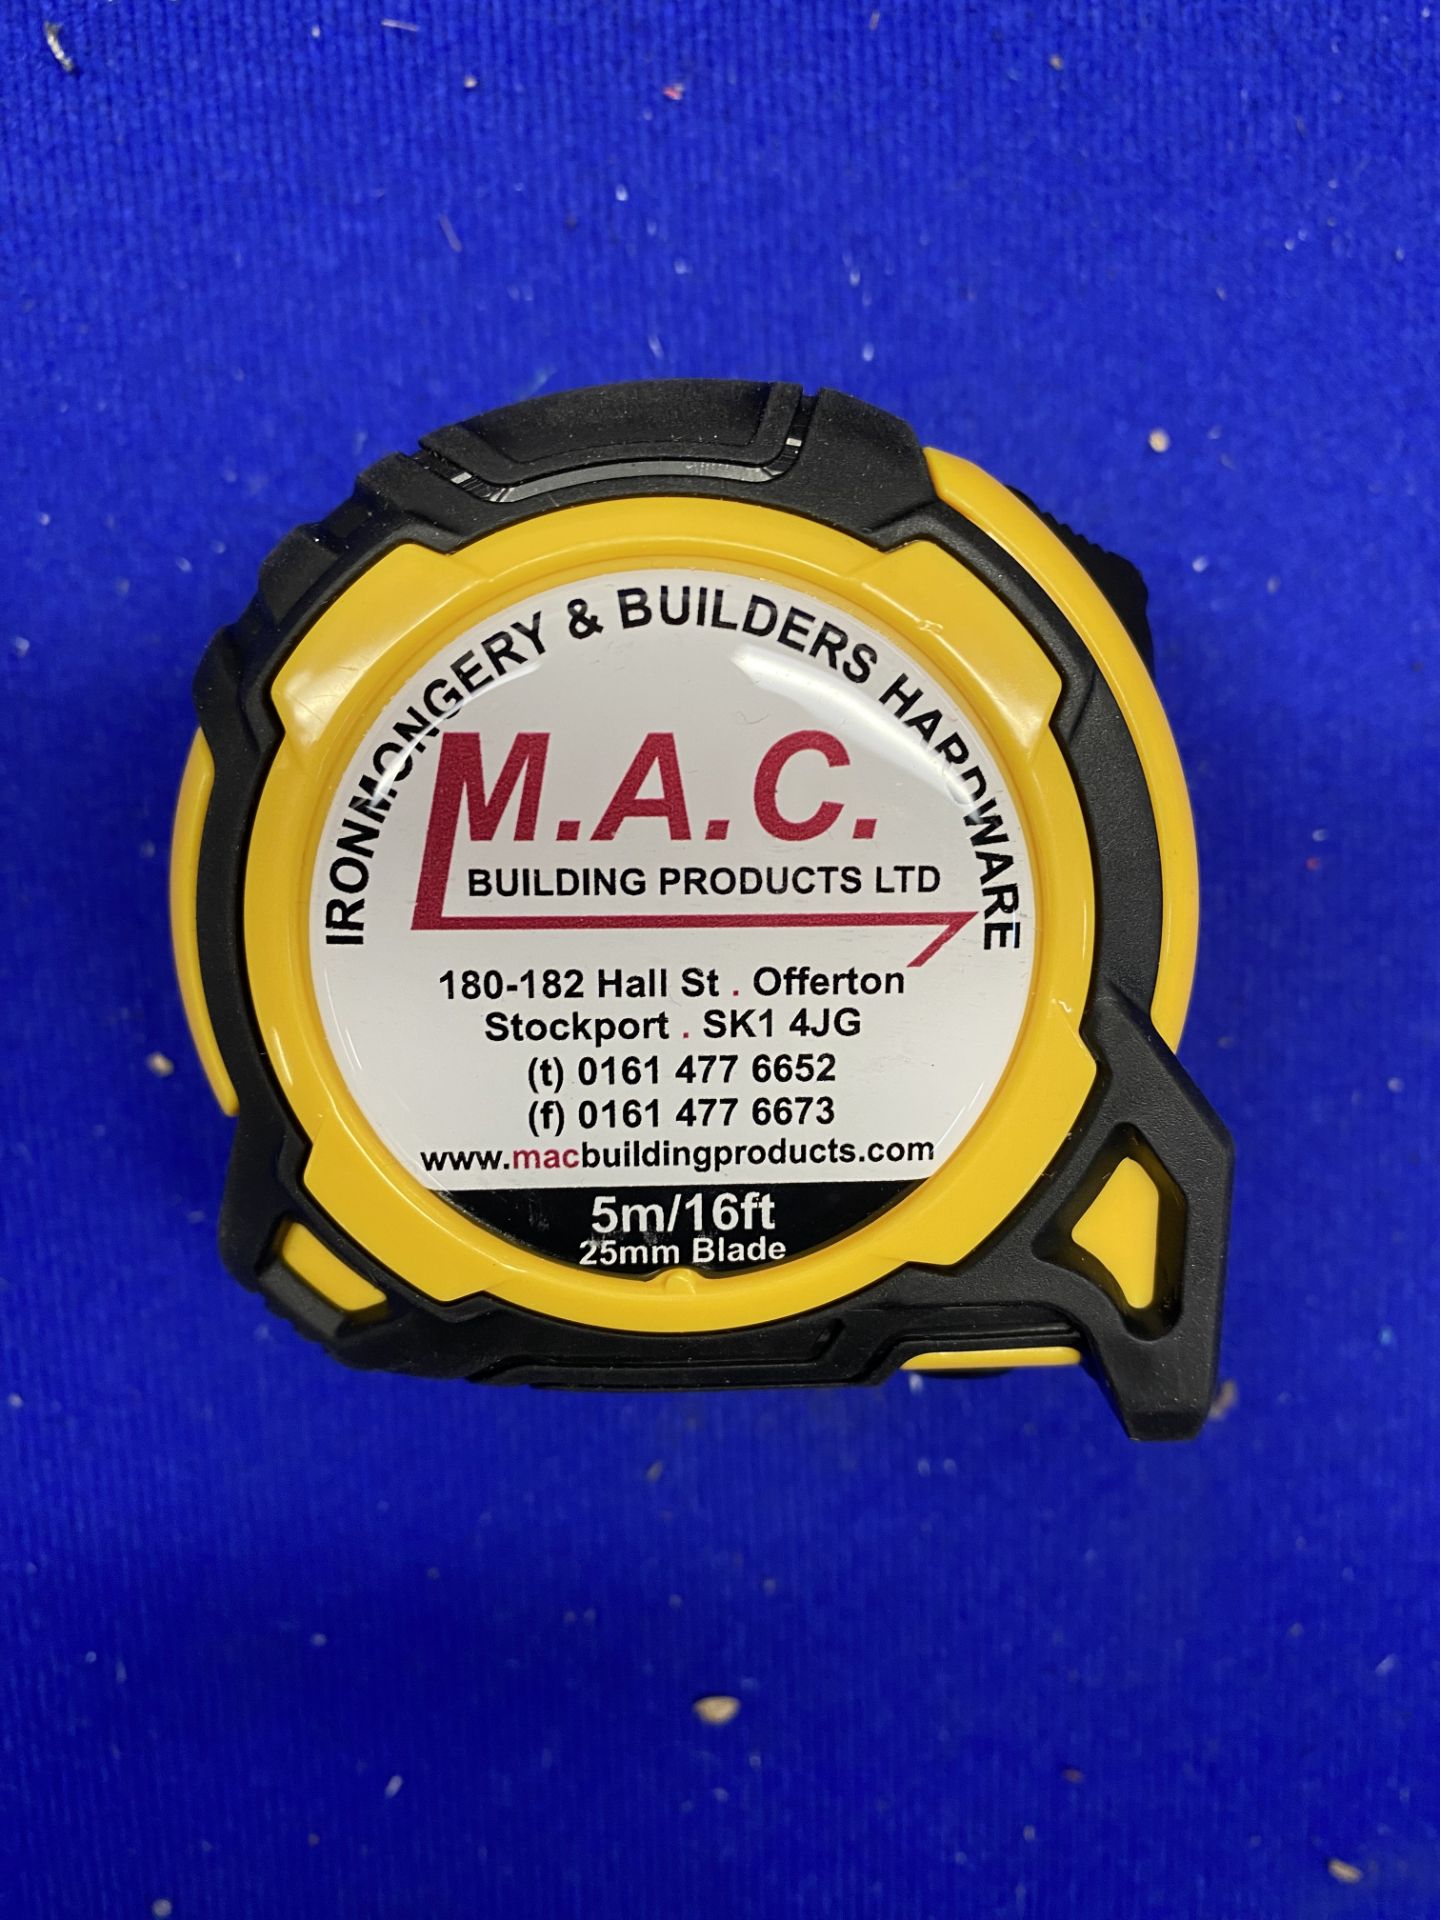 36 x Advent Tools Personalised ' M.A.C. Building Products Ltd" 5M/16ft Measuring Tapes